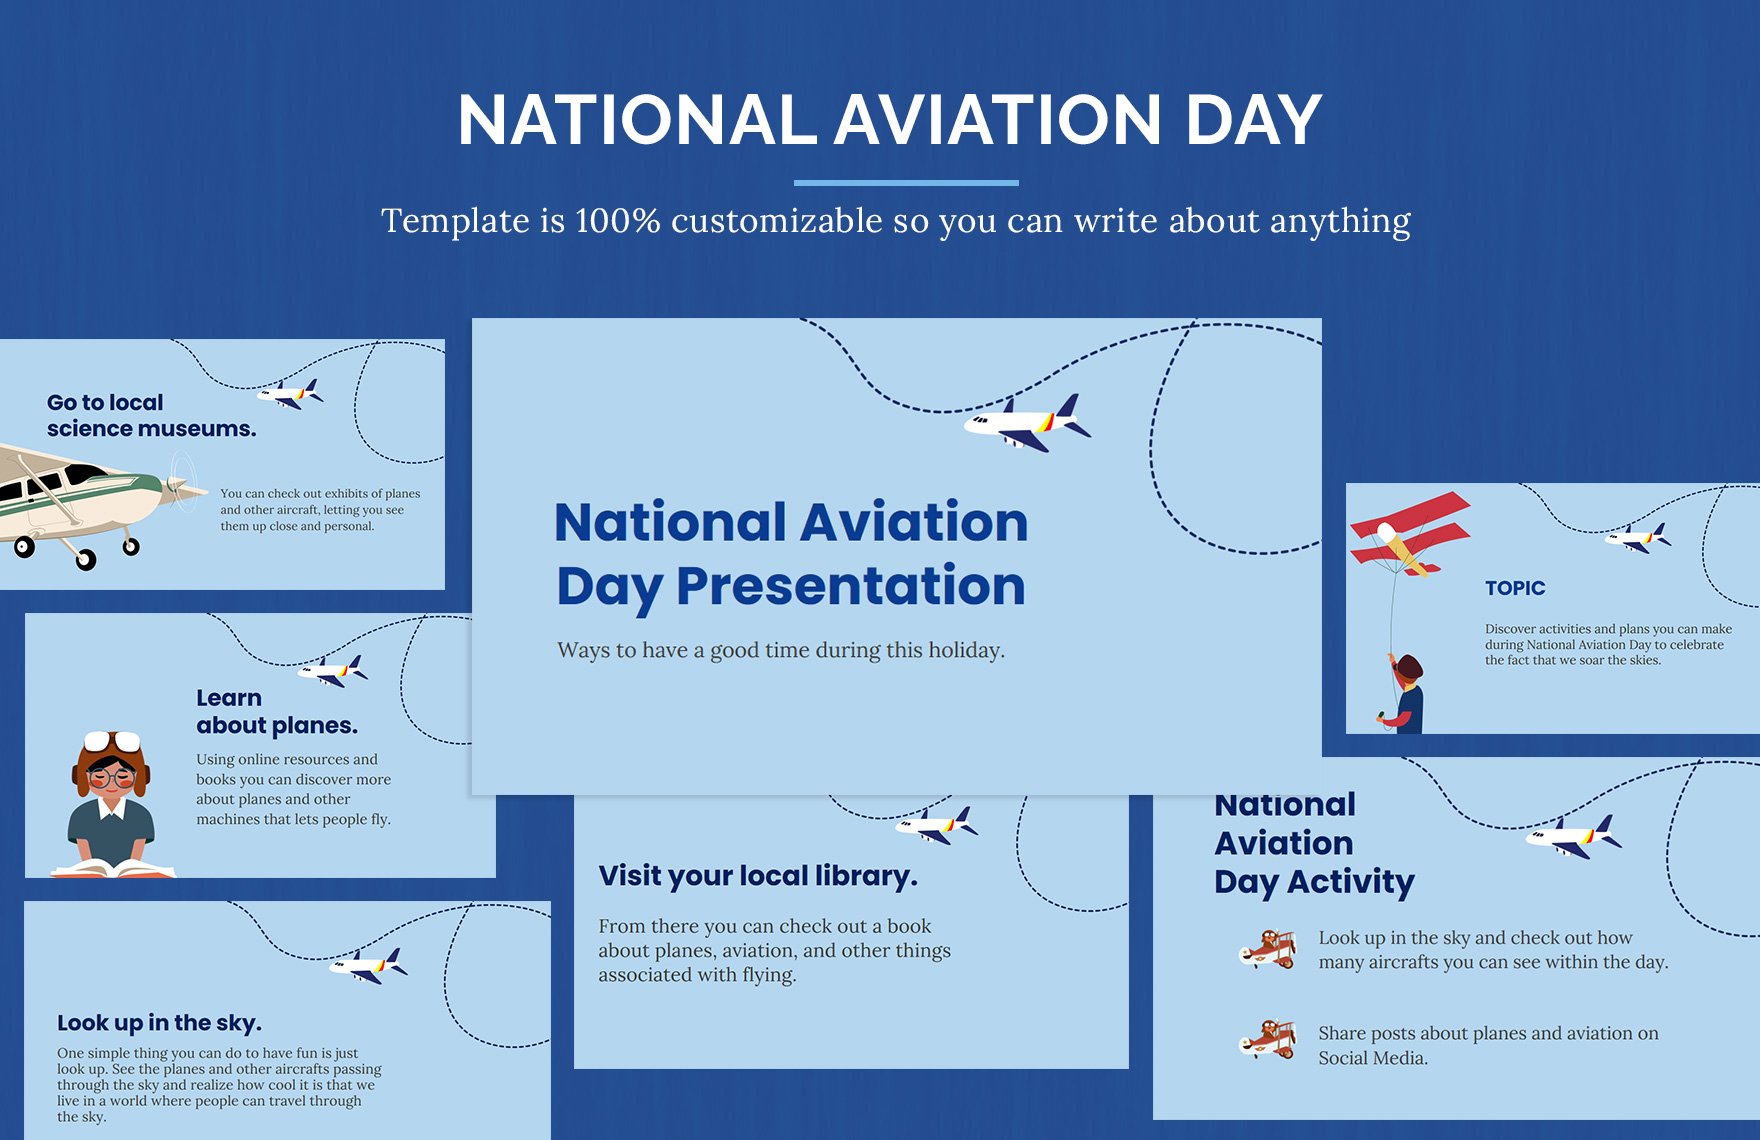 National Aviation Day Presentation Template in PDF, PowerPoint, Google Slides